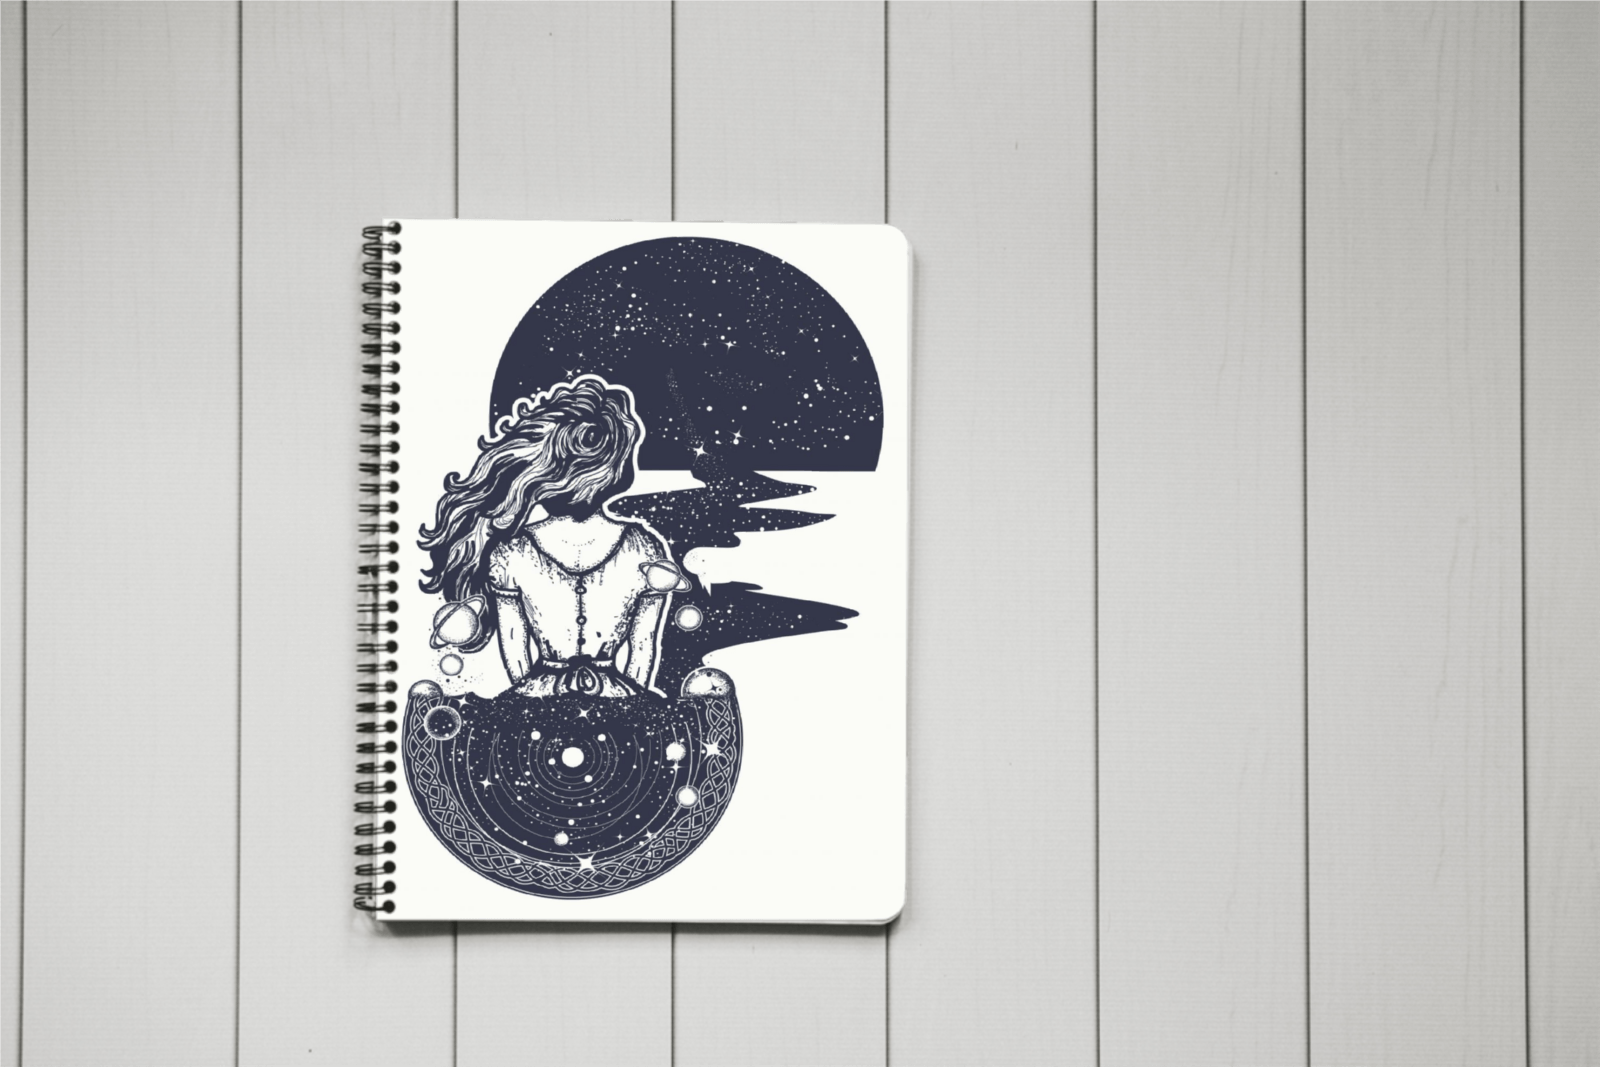 The Writer’s Epiphany Notebook - Space Woman Cover - Scribe Forge